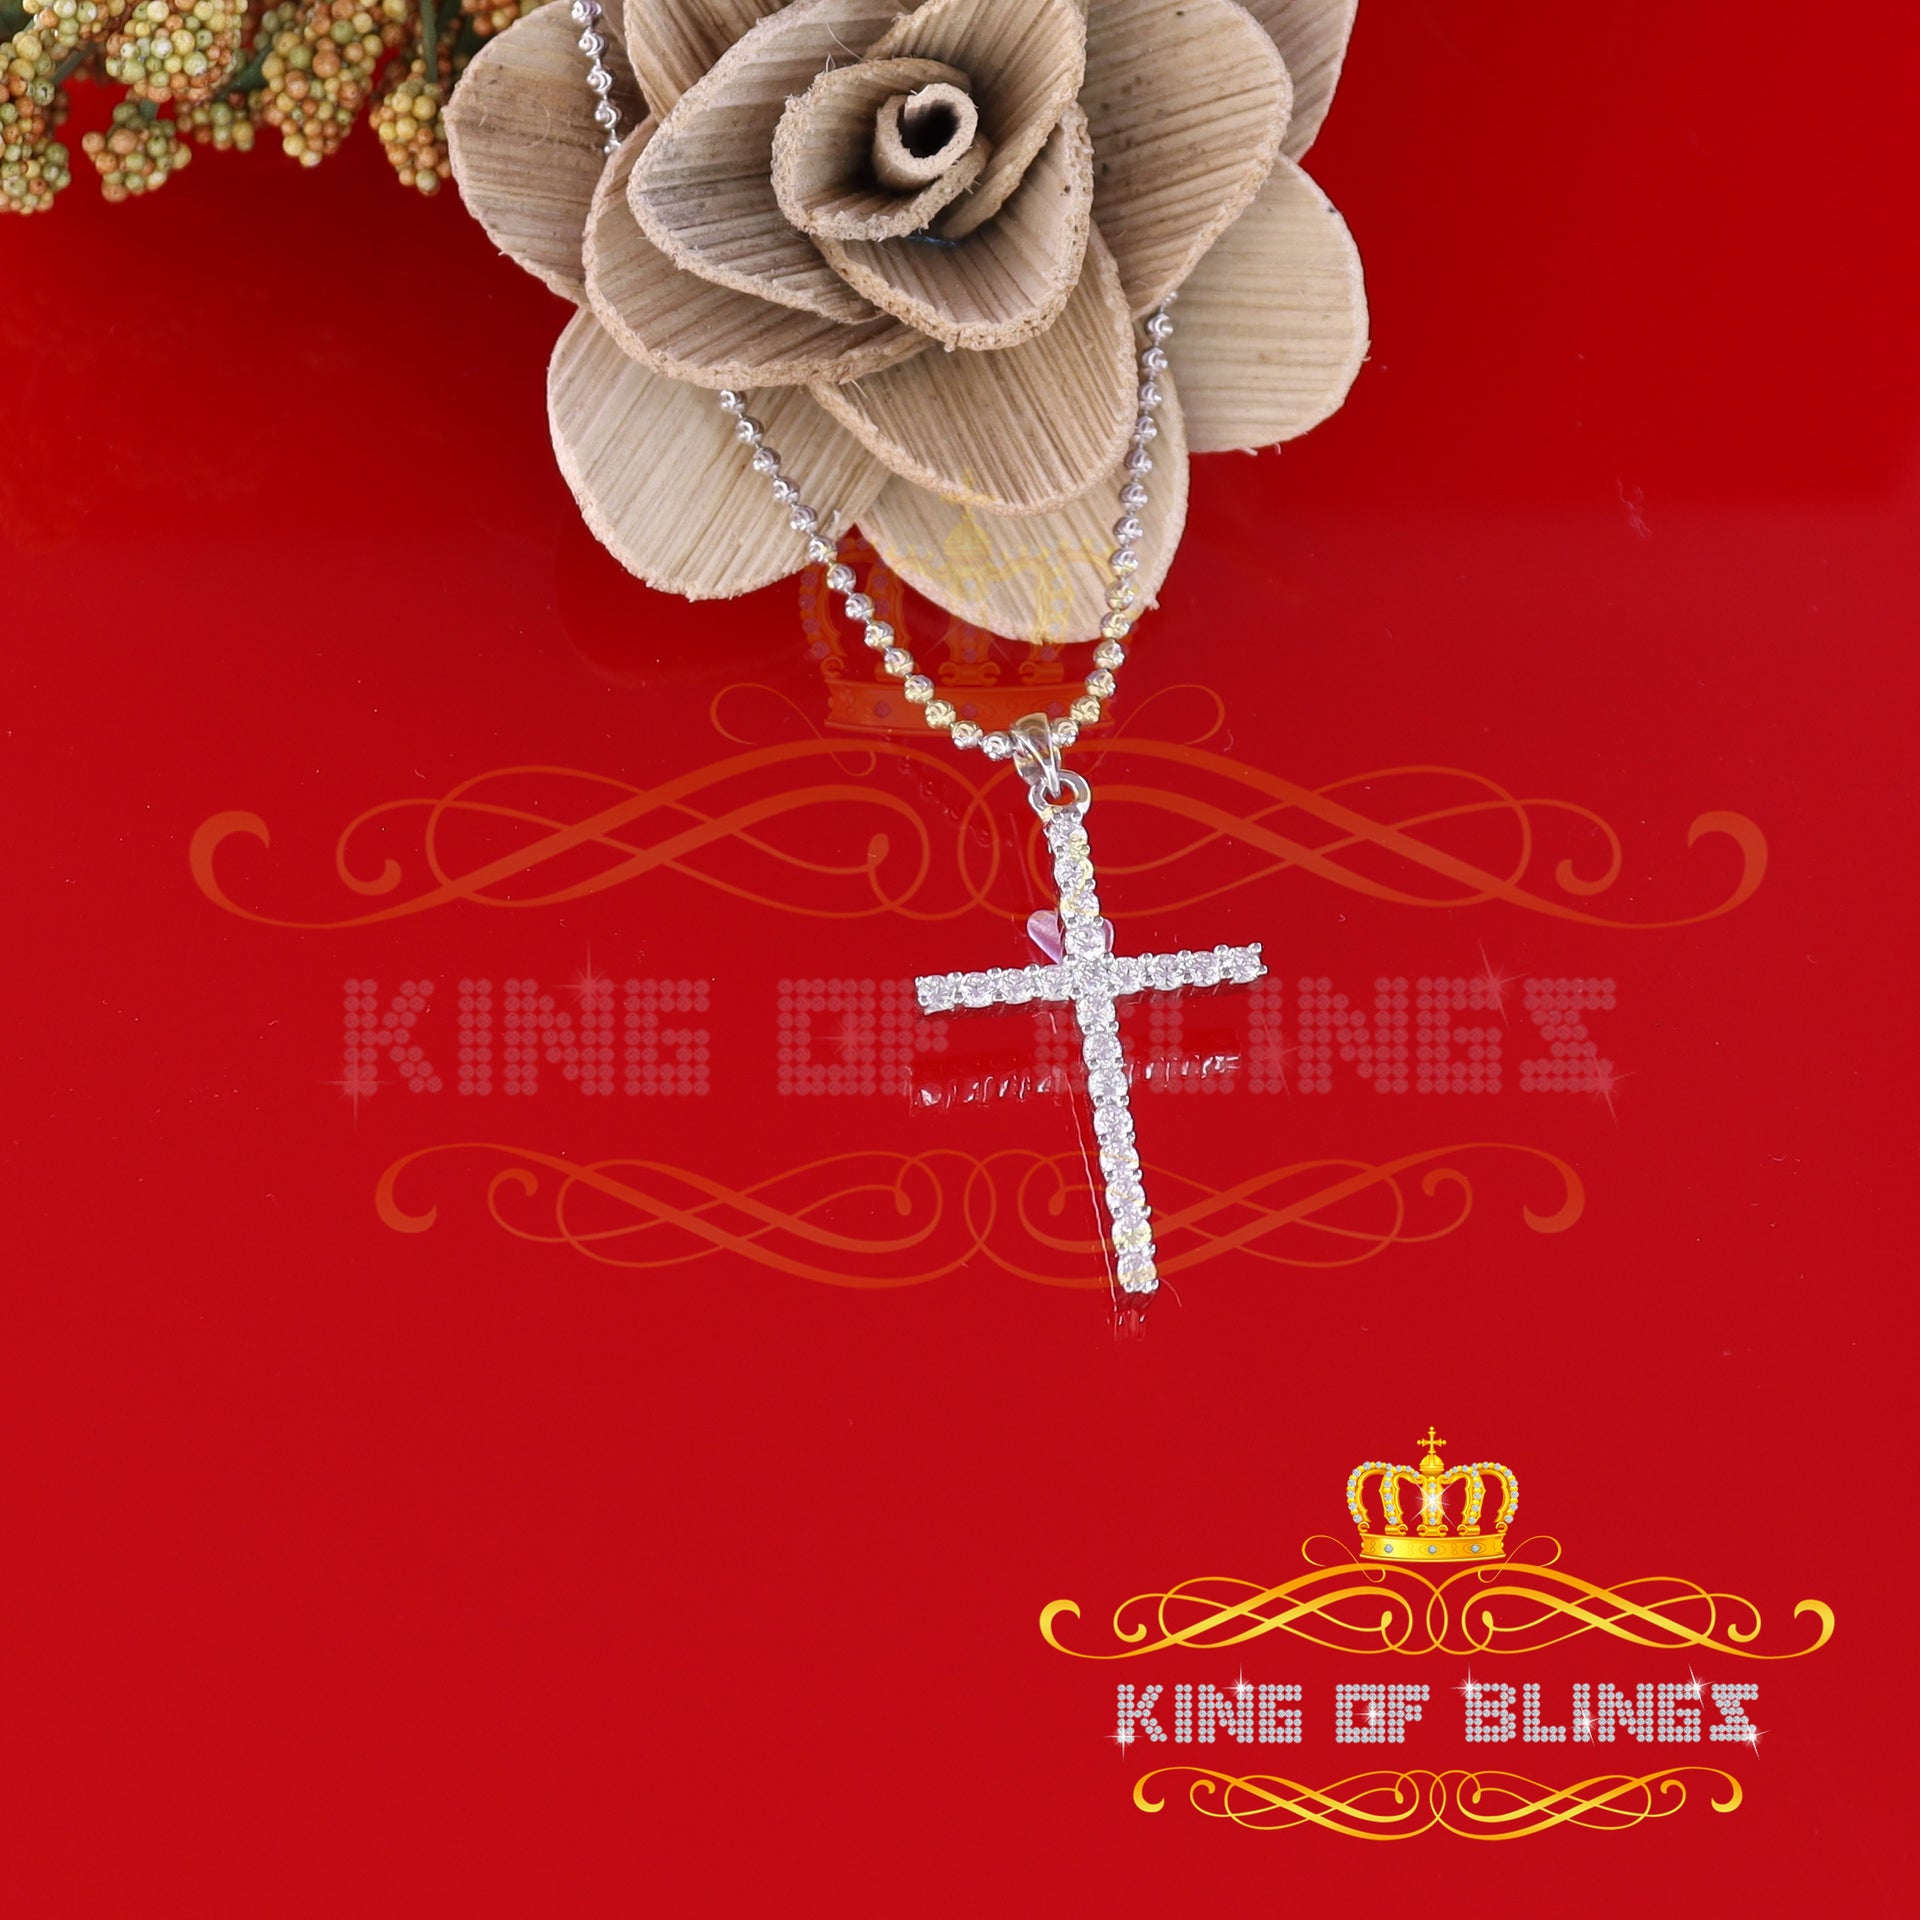 White Sterling Silver Pendant 2.31ct Cubic Zirconia Stone Beautiful CROSS Shape KING OF BLINGS